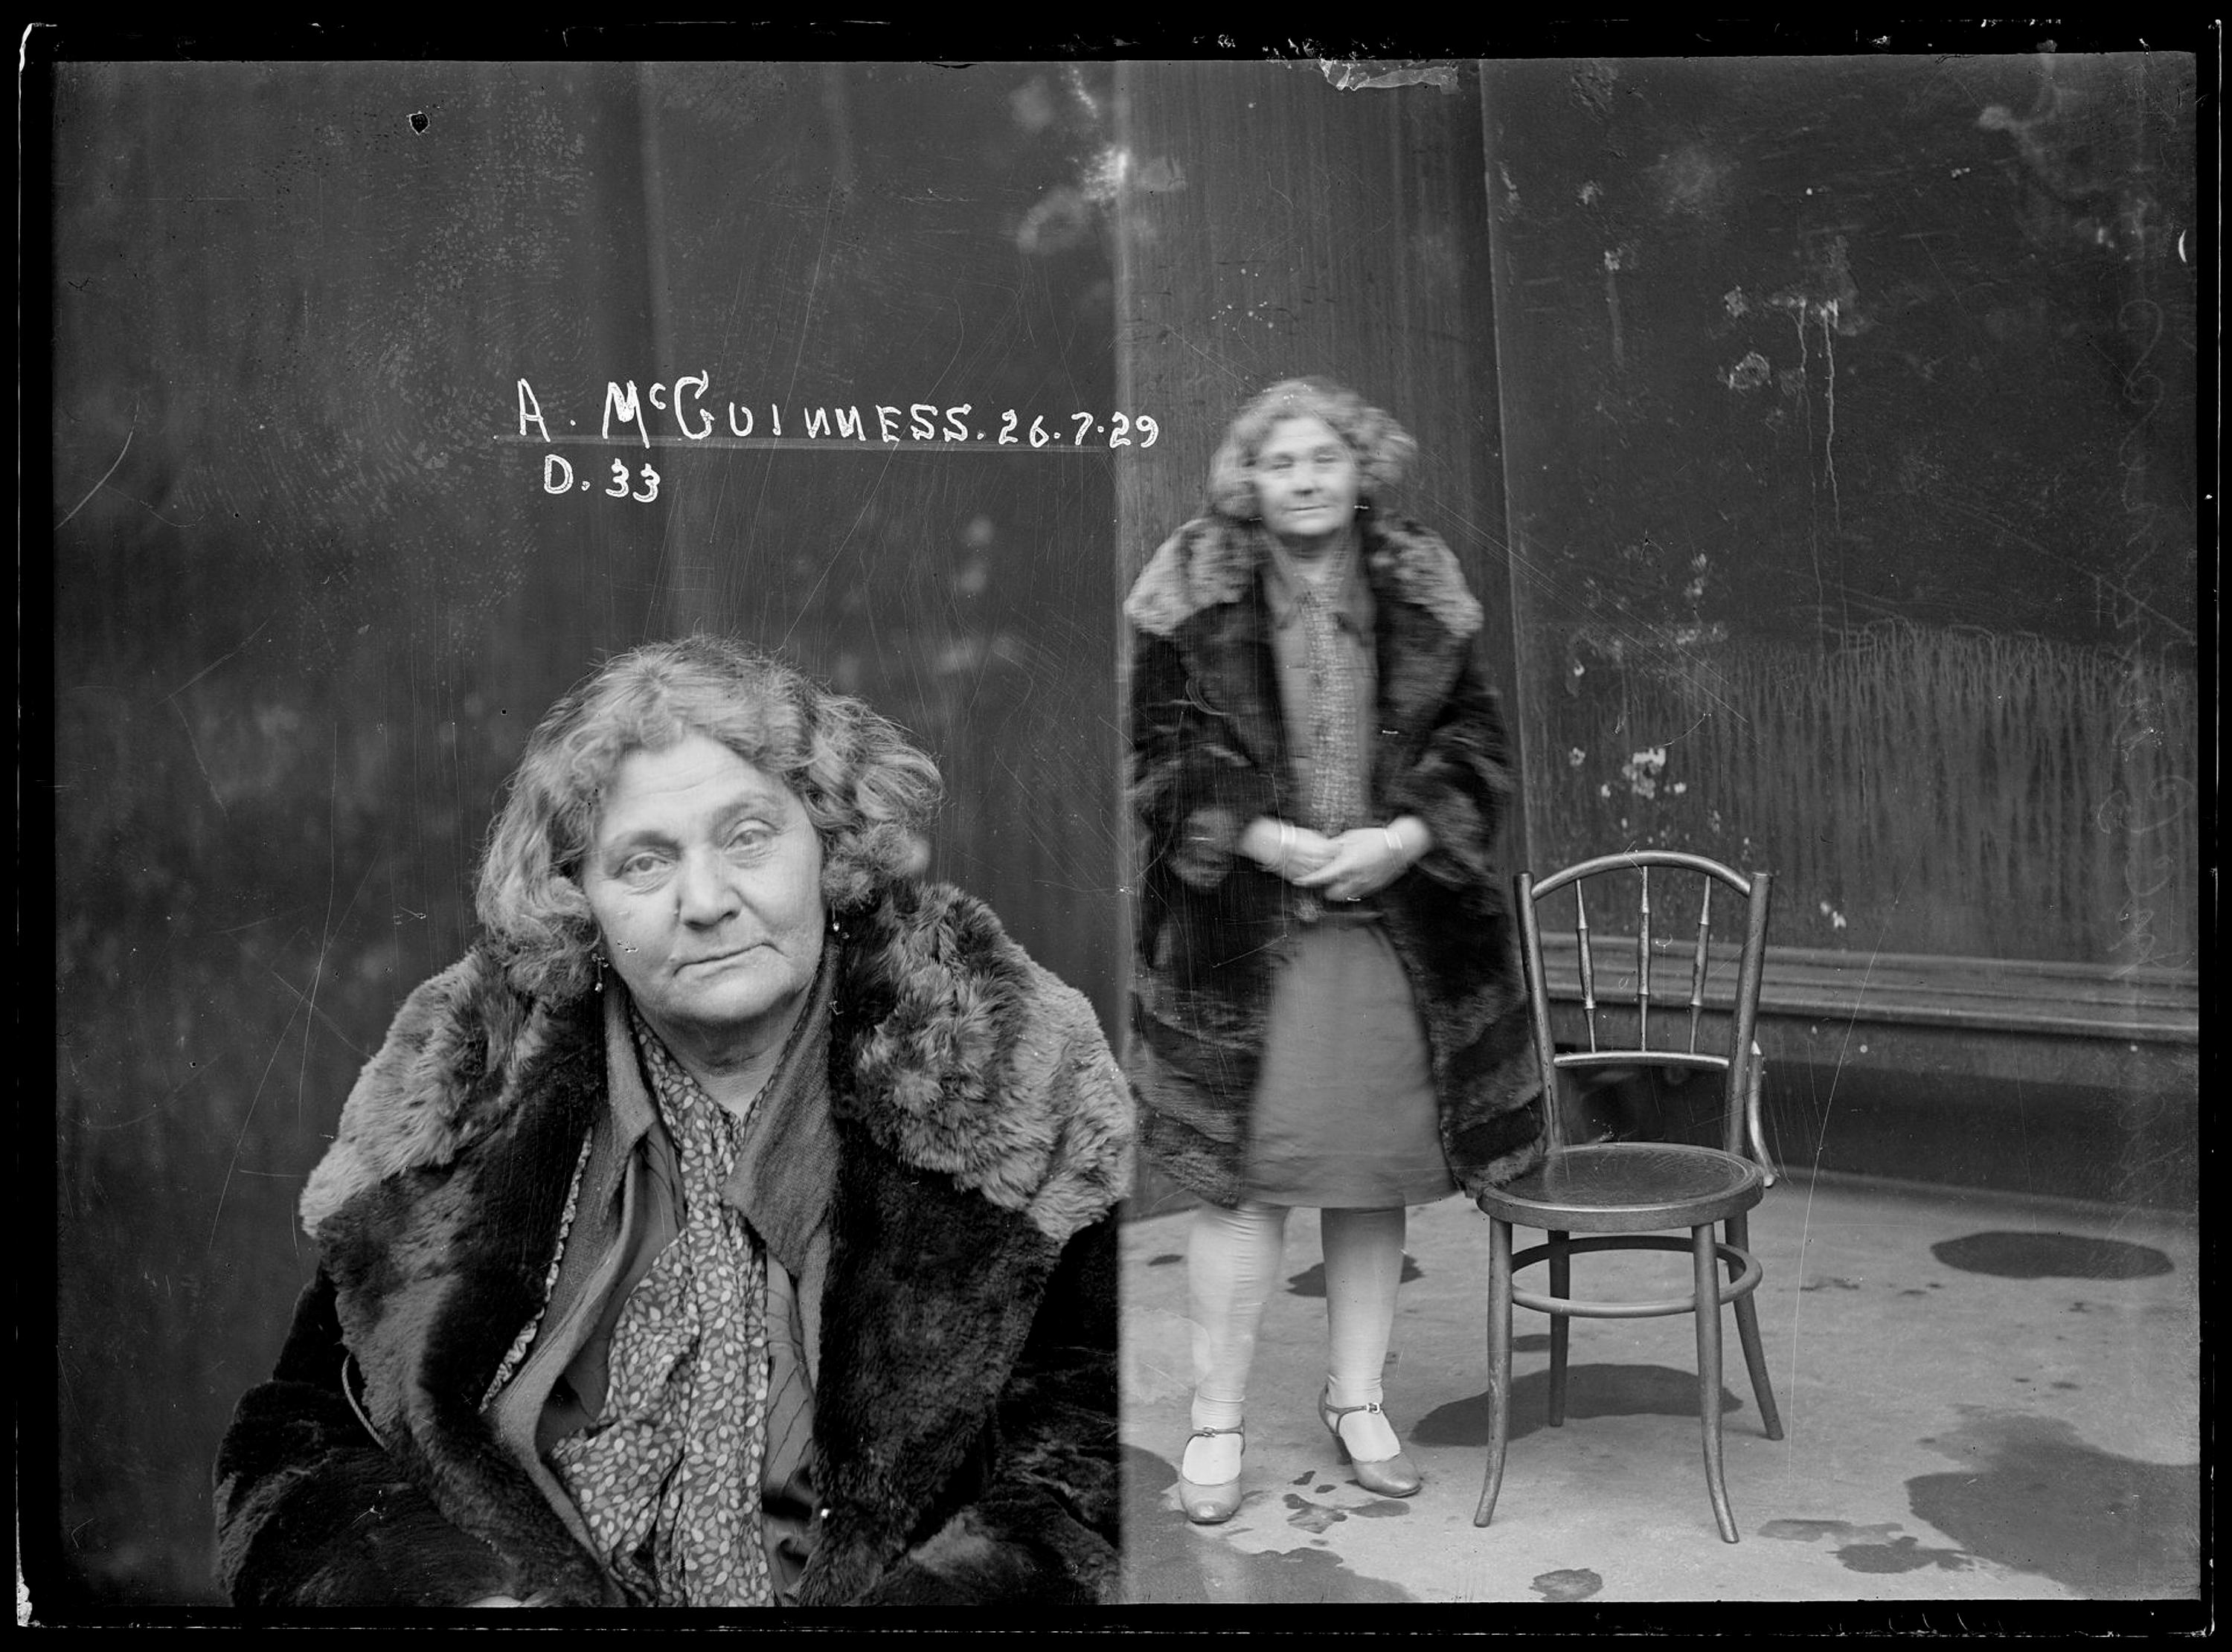 Ada McGuinness (alias Edith Mitchell, Edith Cavanagh), Special photograph number D33, 26 July 1929, Central Police Station, Sydney